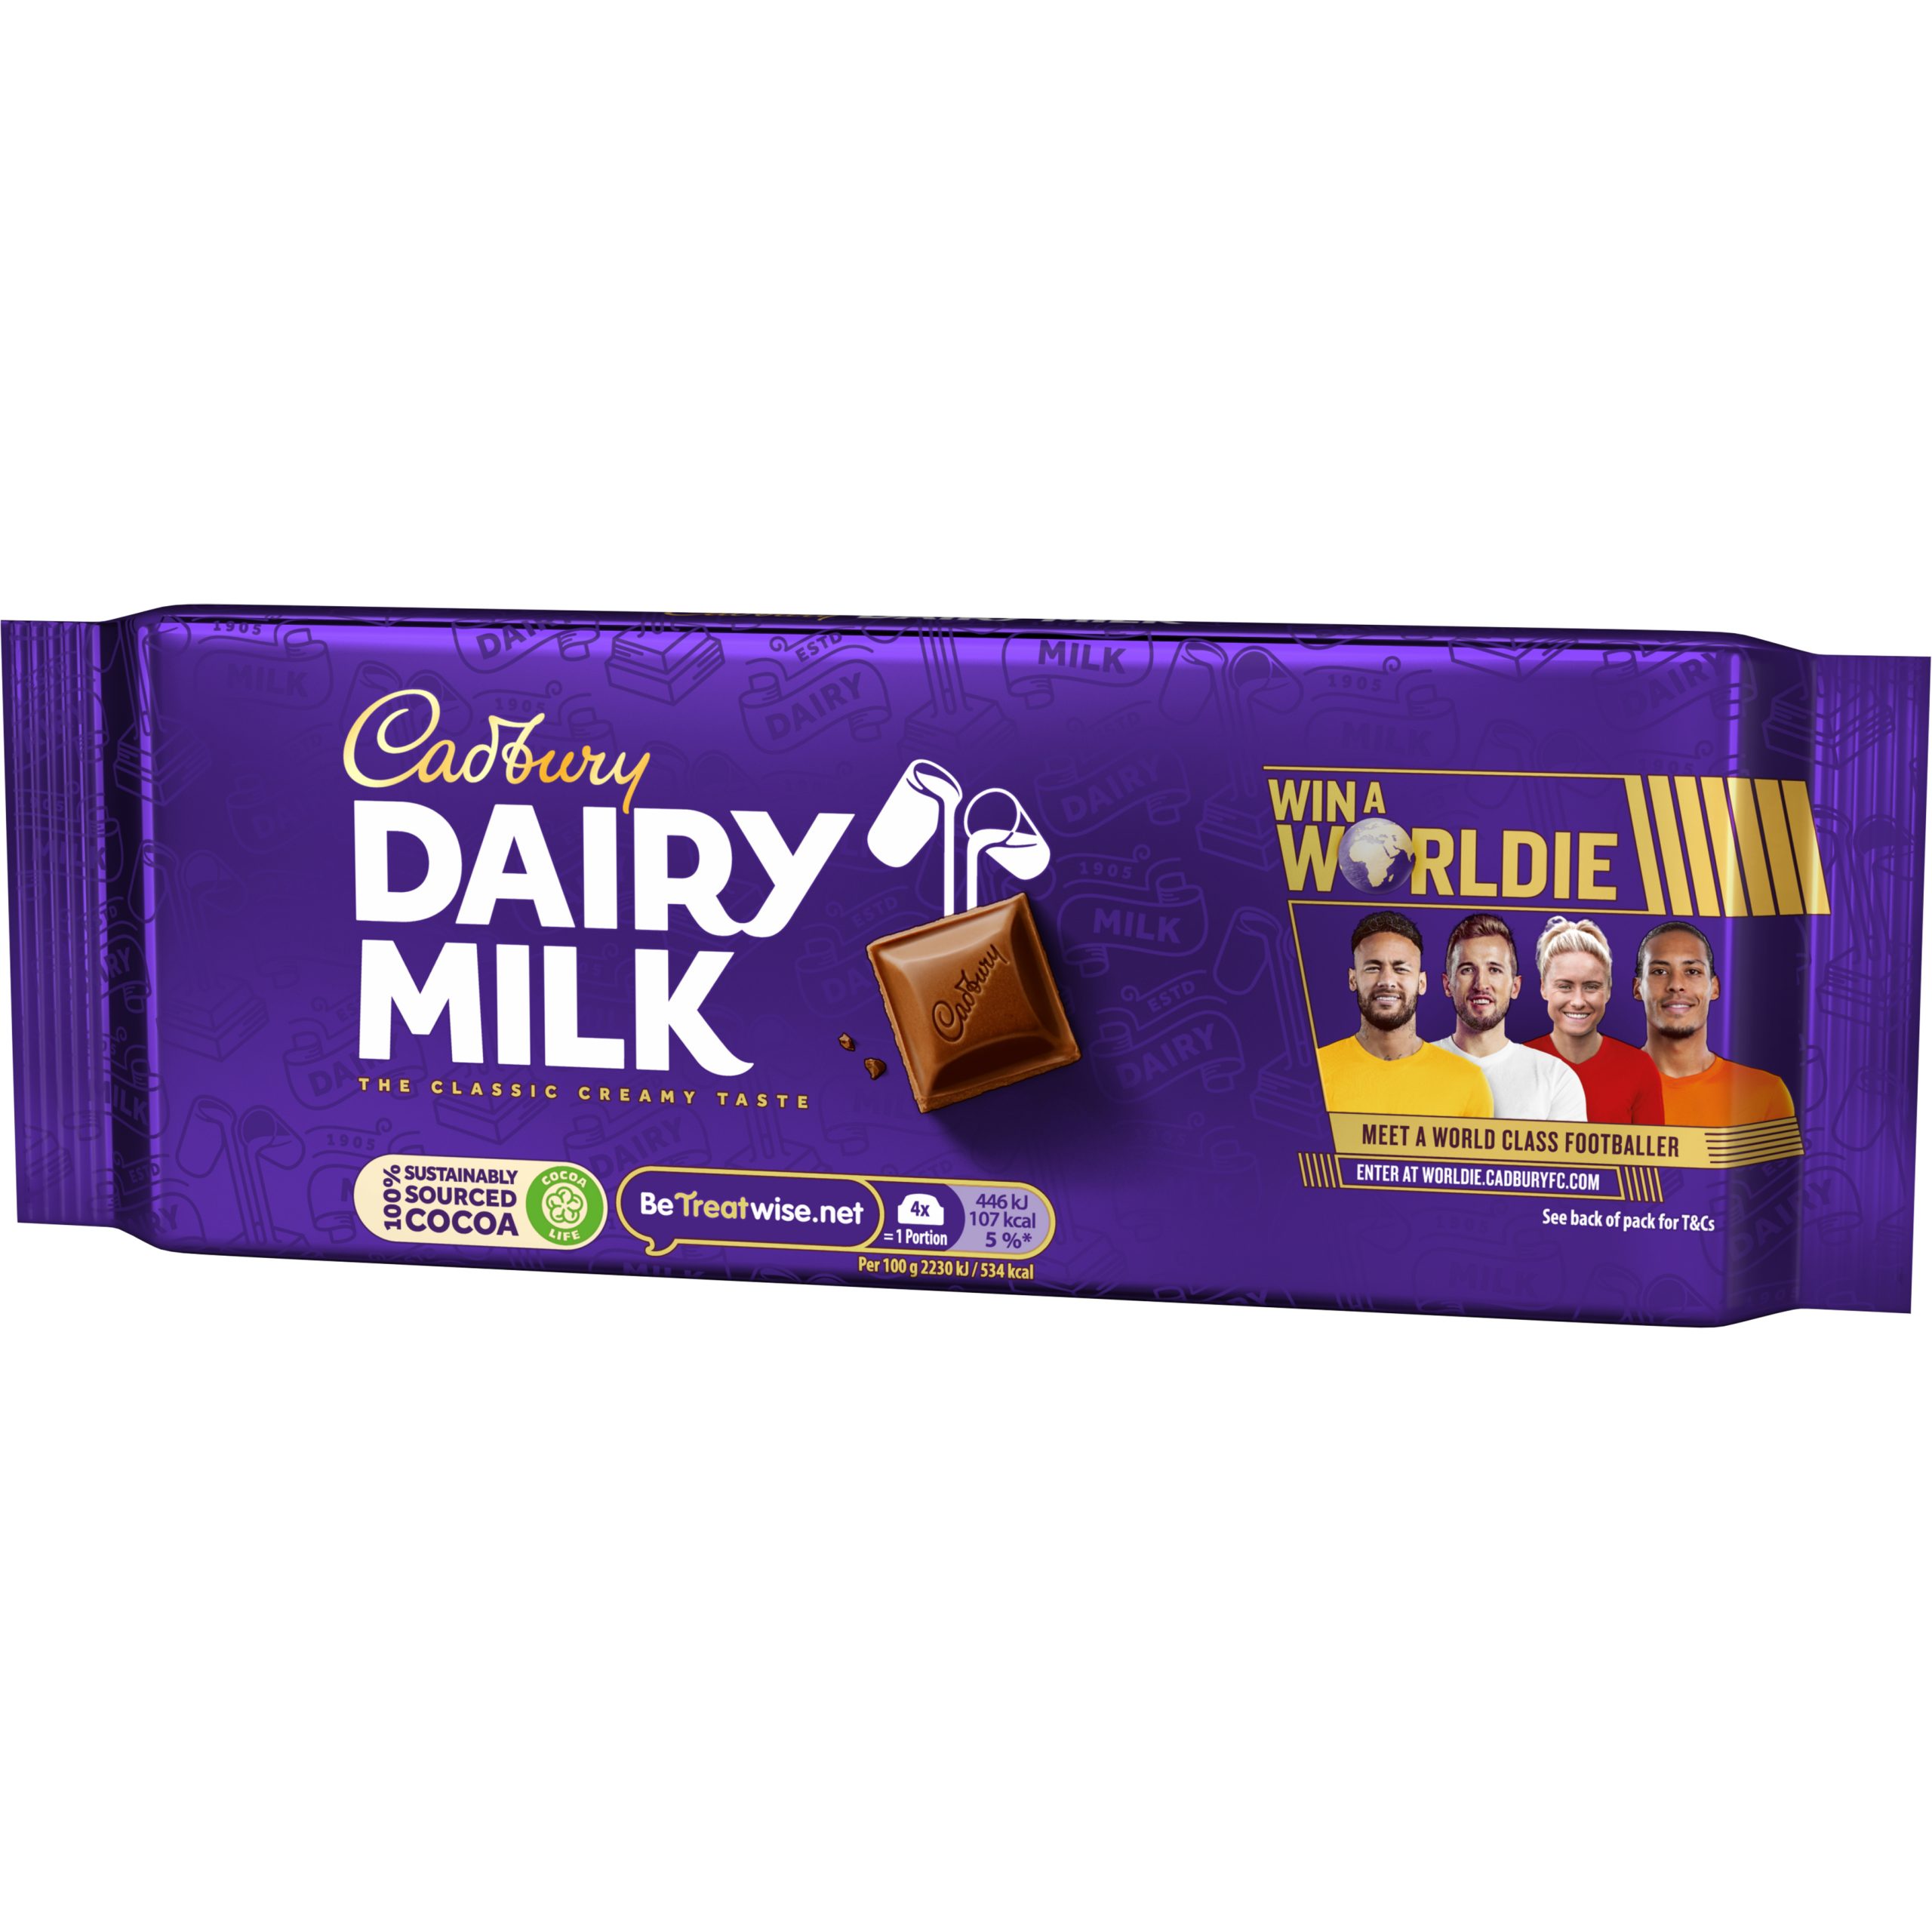 ‘Win a Worldie’ with new Cadbury FC promotion